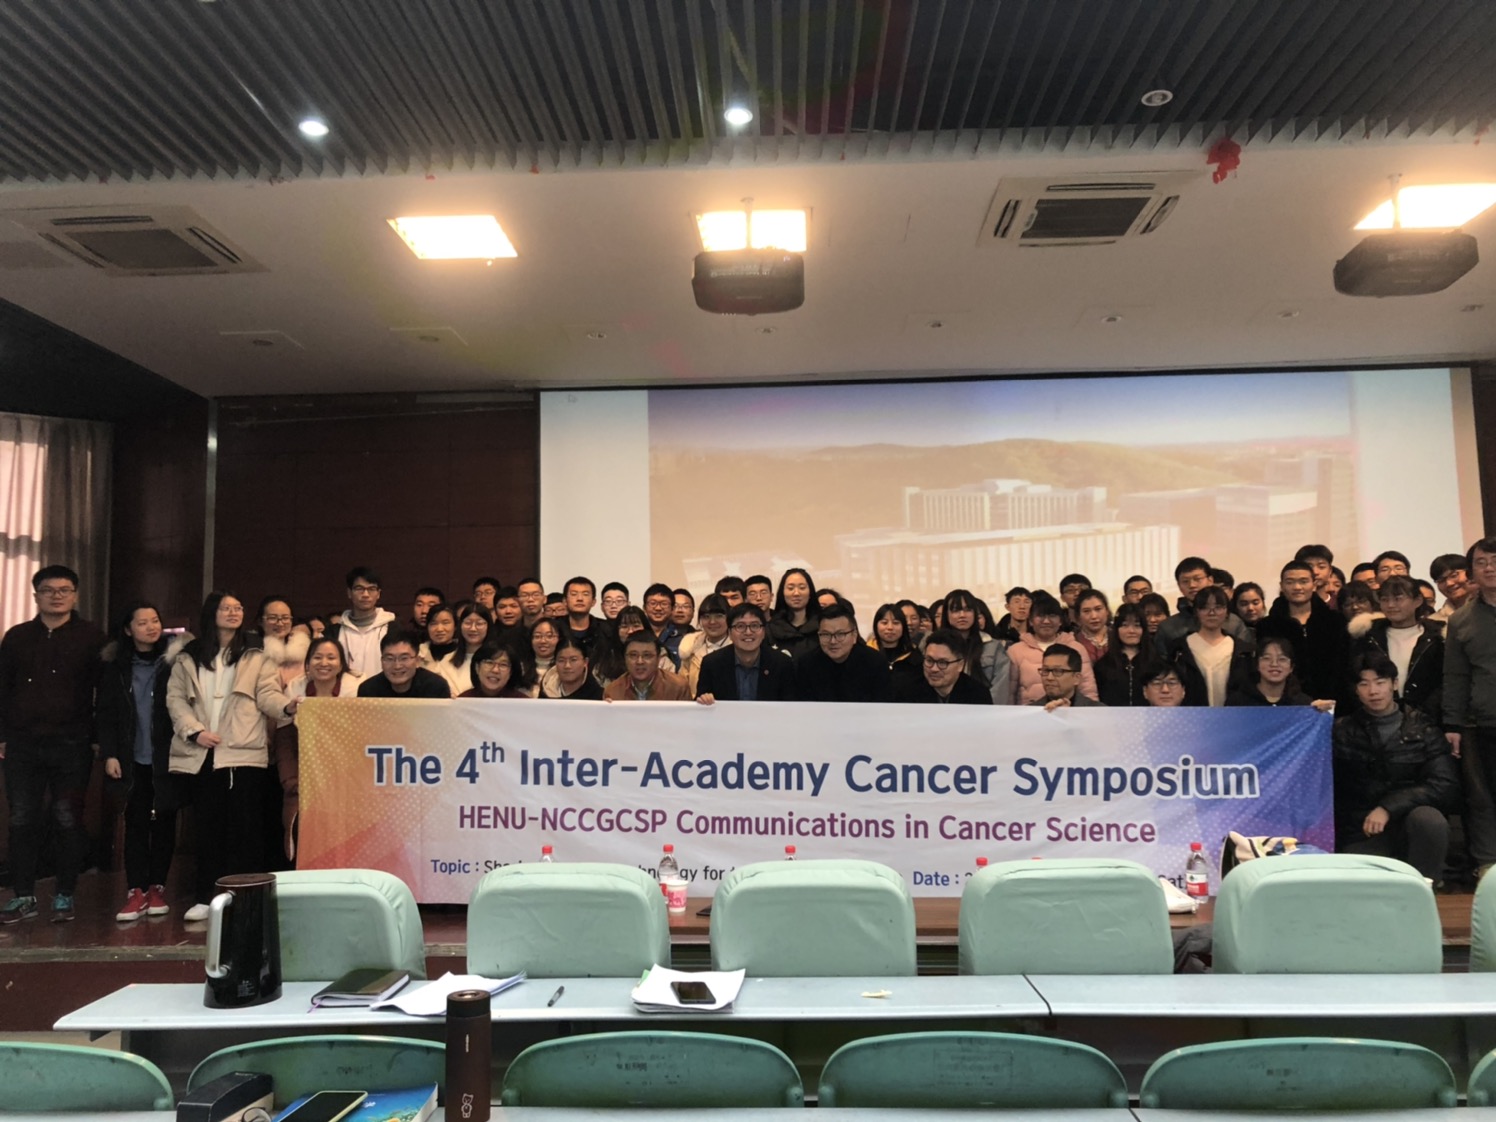 A photo of professors including Park Jong-bae, Dean of Graduate School, Lee Ho, Dean of Cancer and Biomedical Sciences, Professor Yun Geum-ryong, and students of Henan University in China holding a symposium banner at the 4th Inter Academy Cancer Symposium